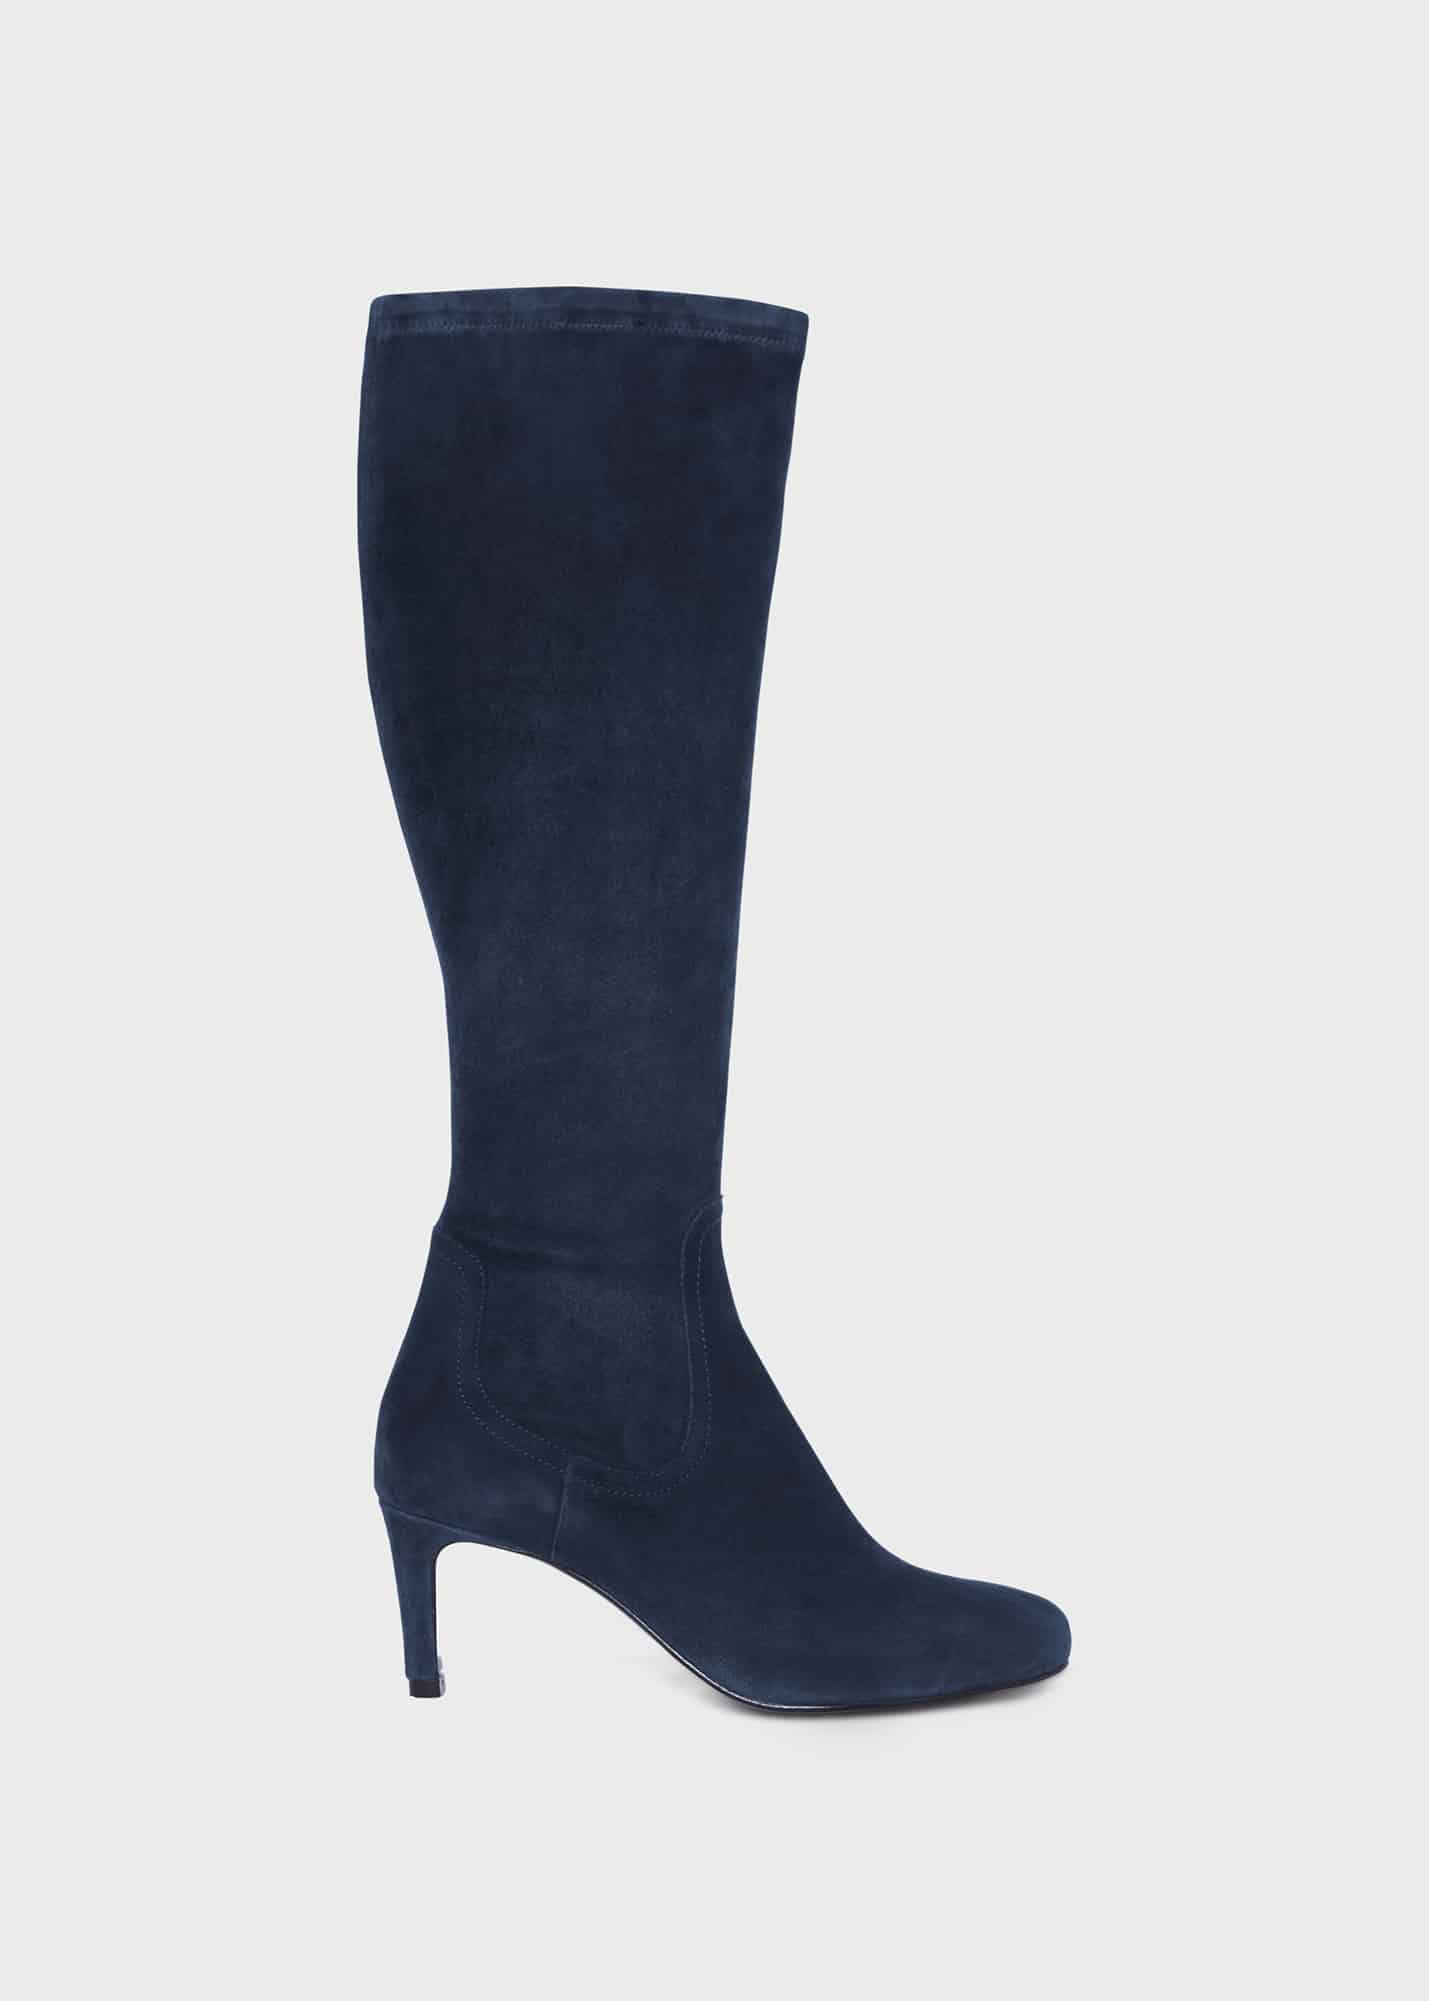 Women's Boots | Ankle, Chelsea & Knee High Boots | Hobbs London |